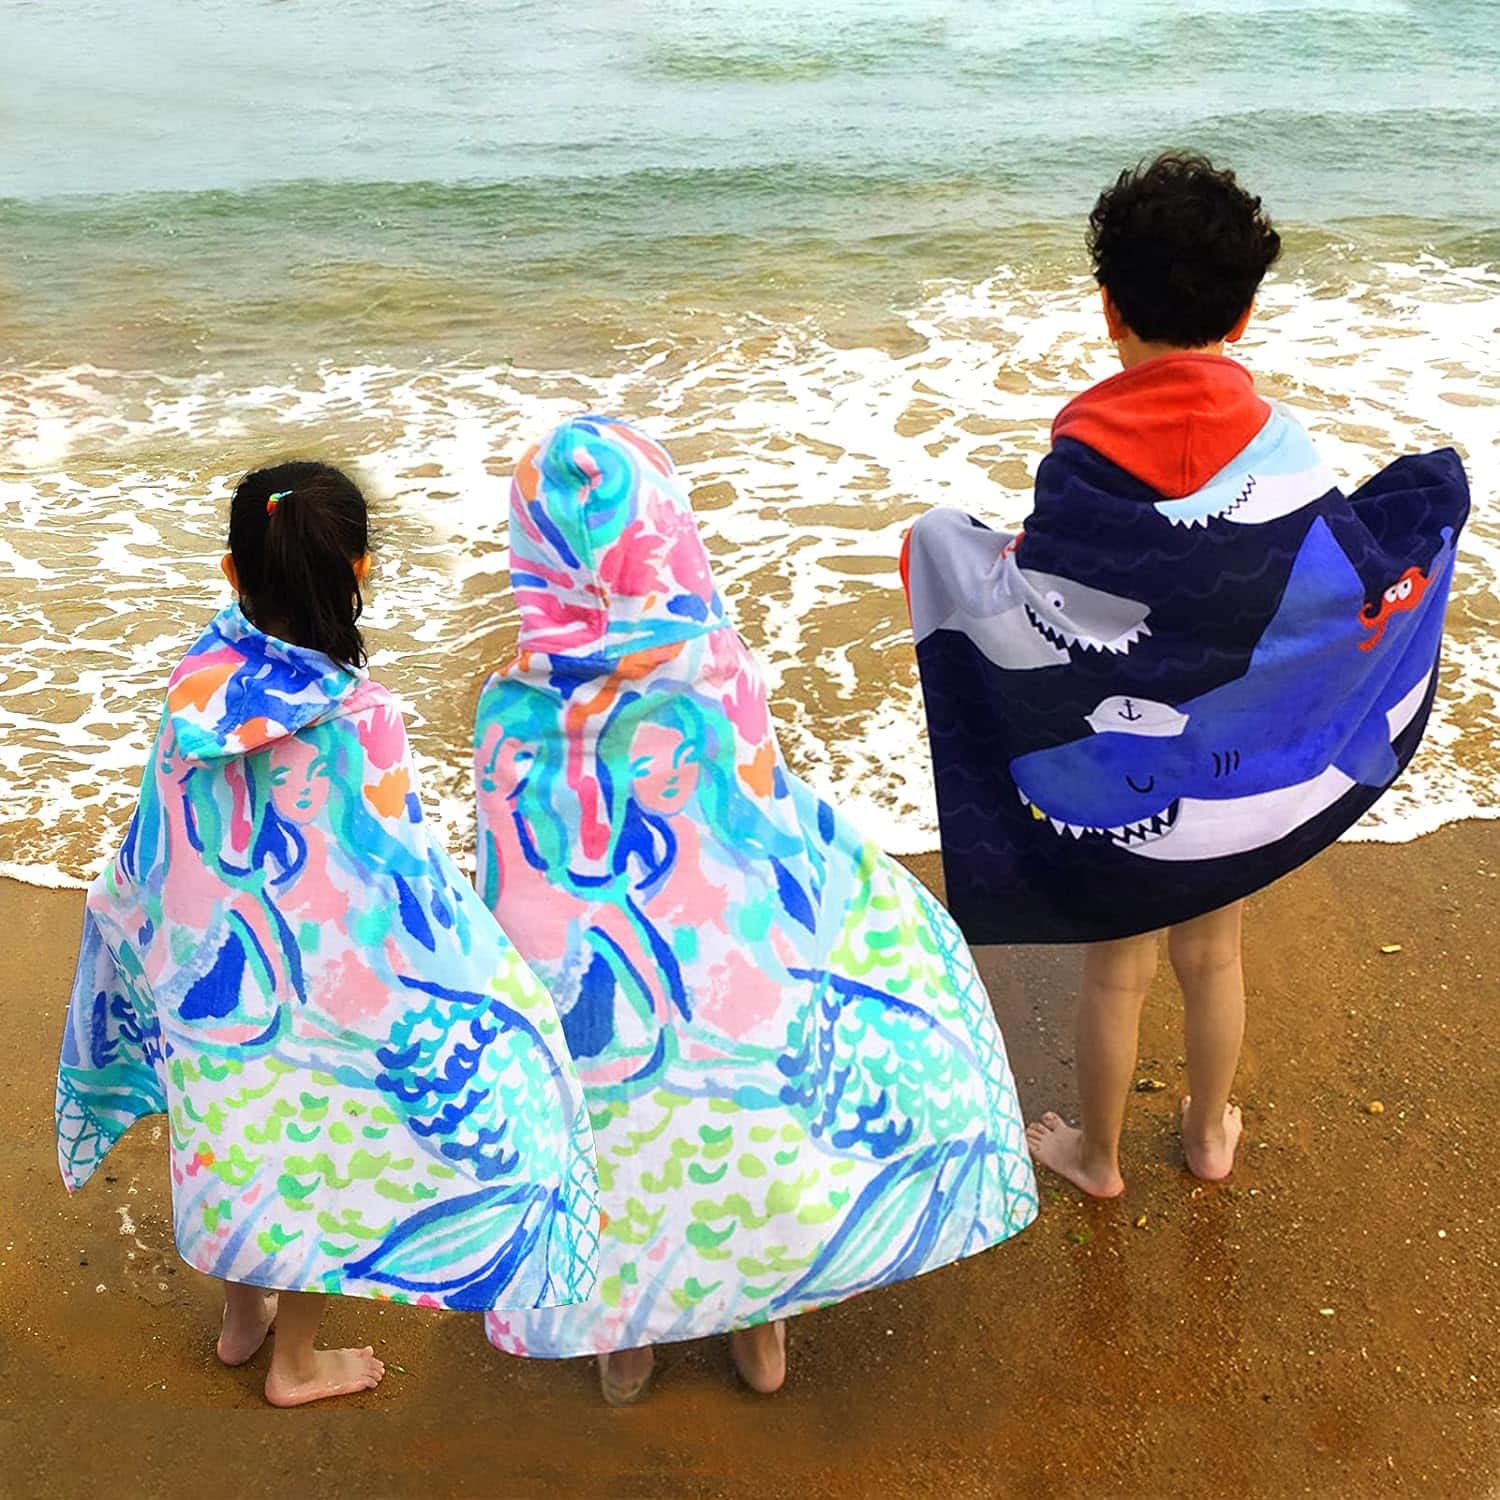 BANGSAUR Kids Hooded Beach Bath Towels: The Perfect Combination of Comfort and Fun